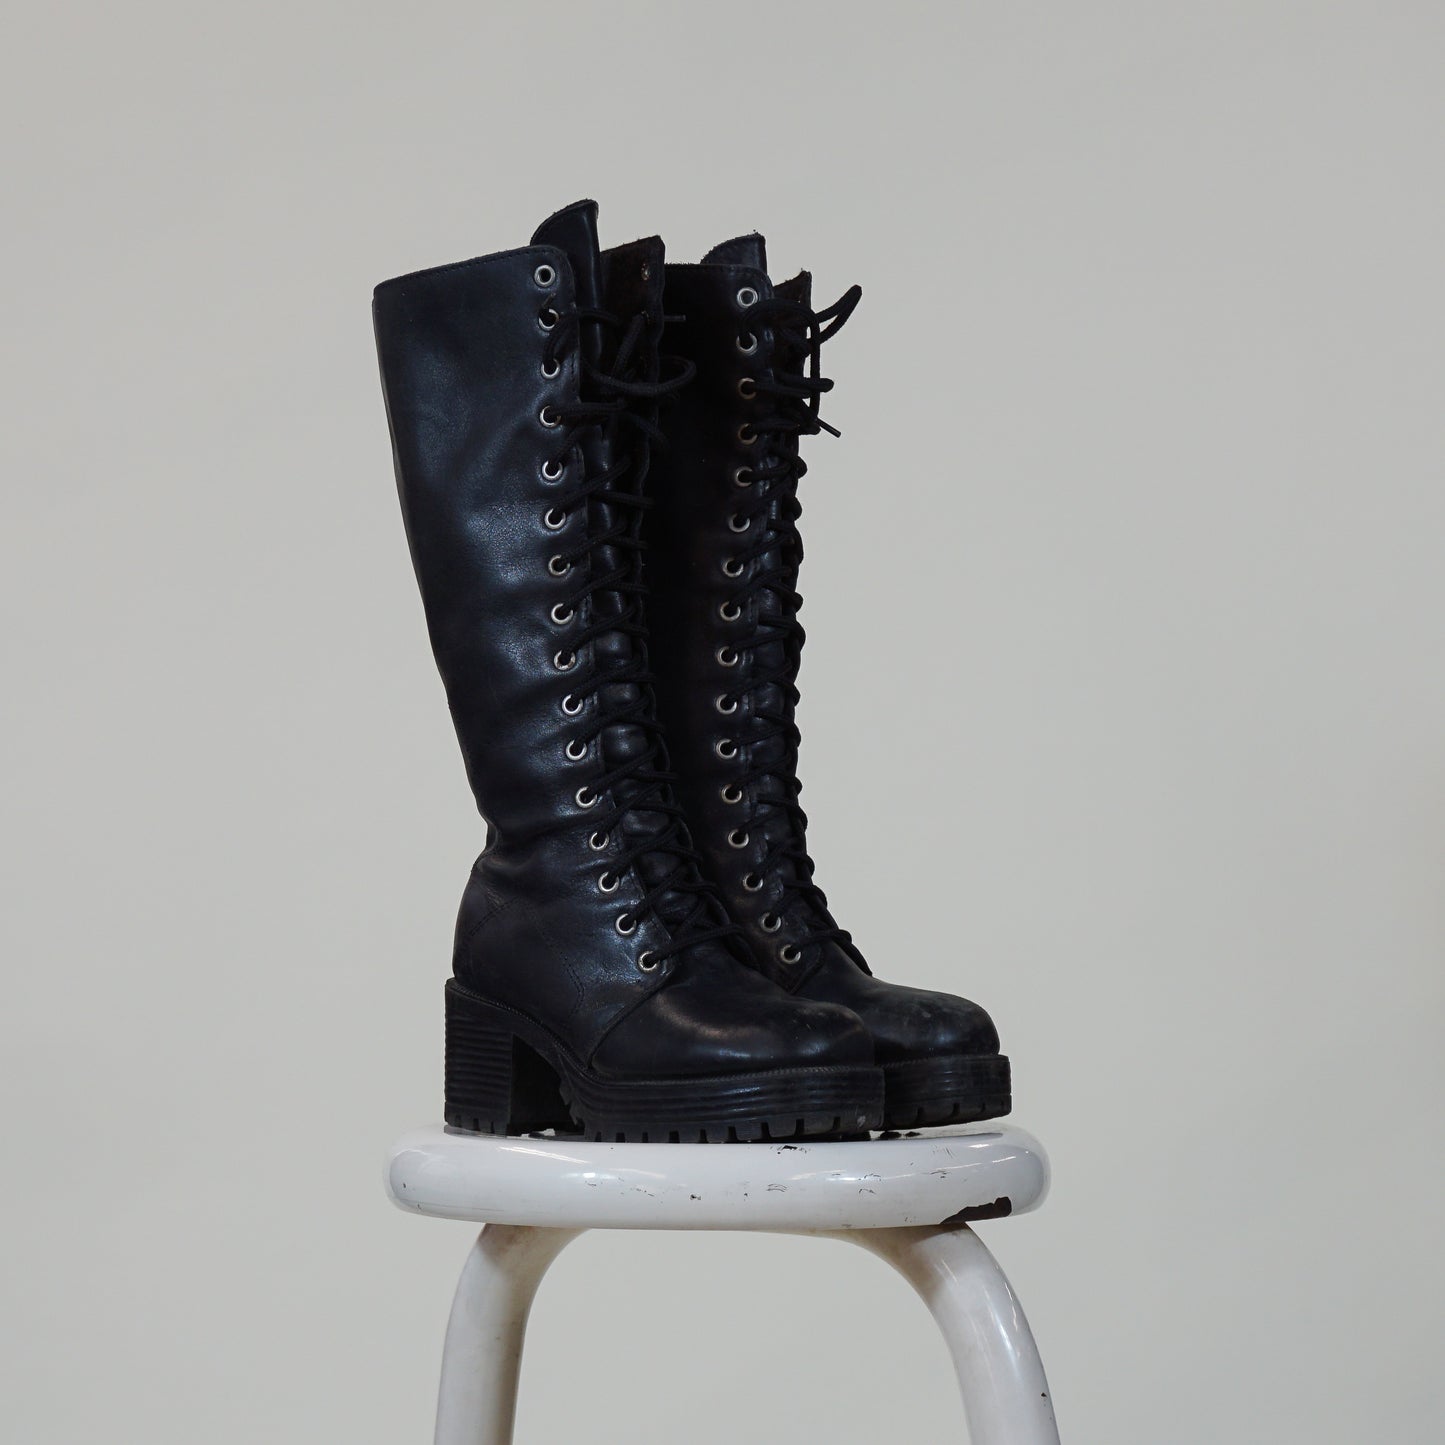 Black Leather Winter Boots Made in Canada (7)